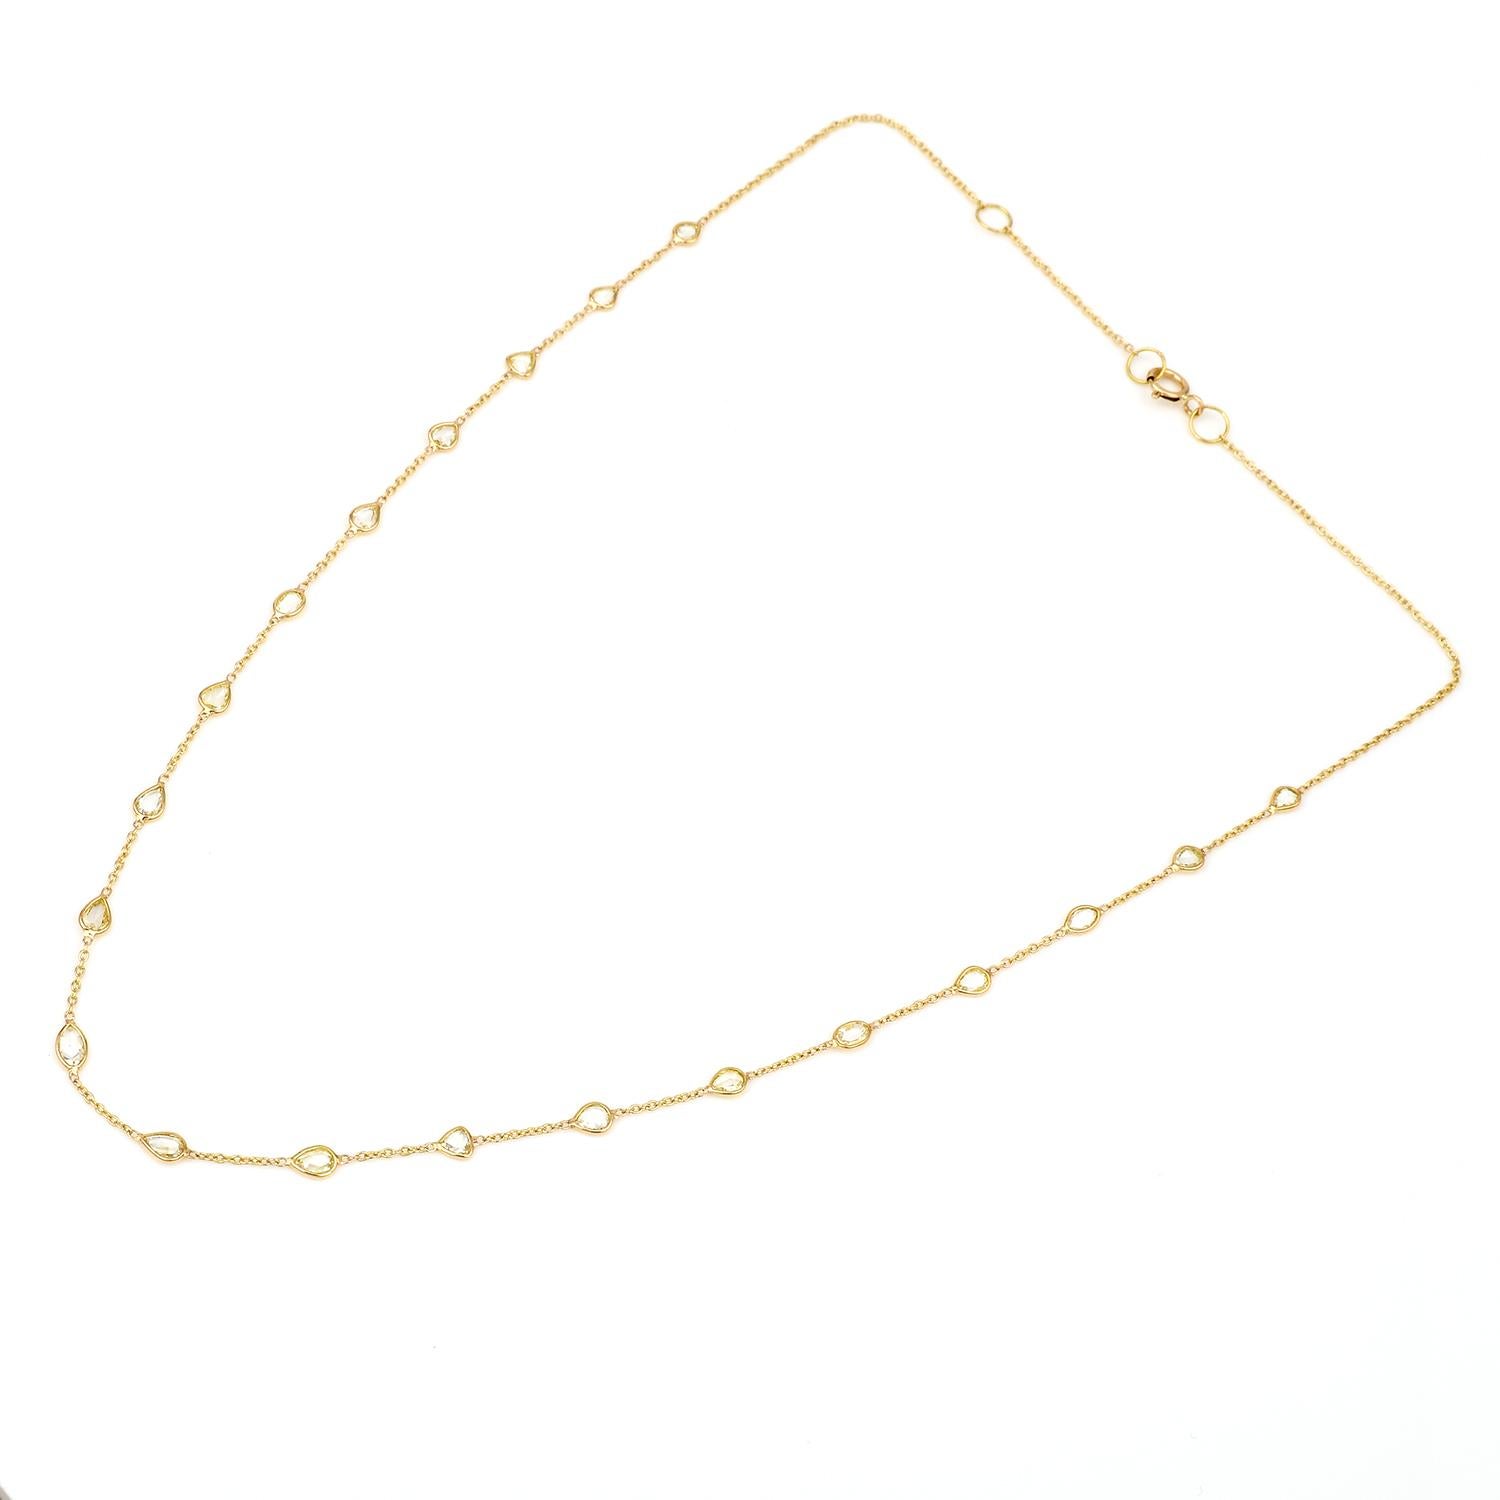 Rose Cut Pear, Round, and Oval 1.25 Carats Diamond Rose-Cut Necklace, 18k Yellow Gold